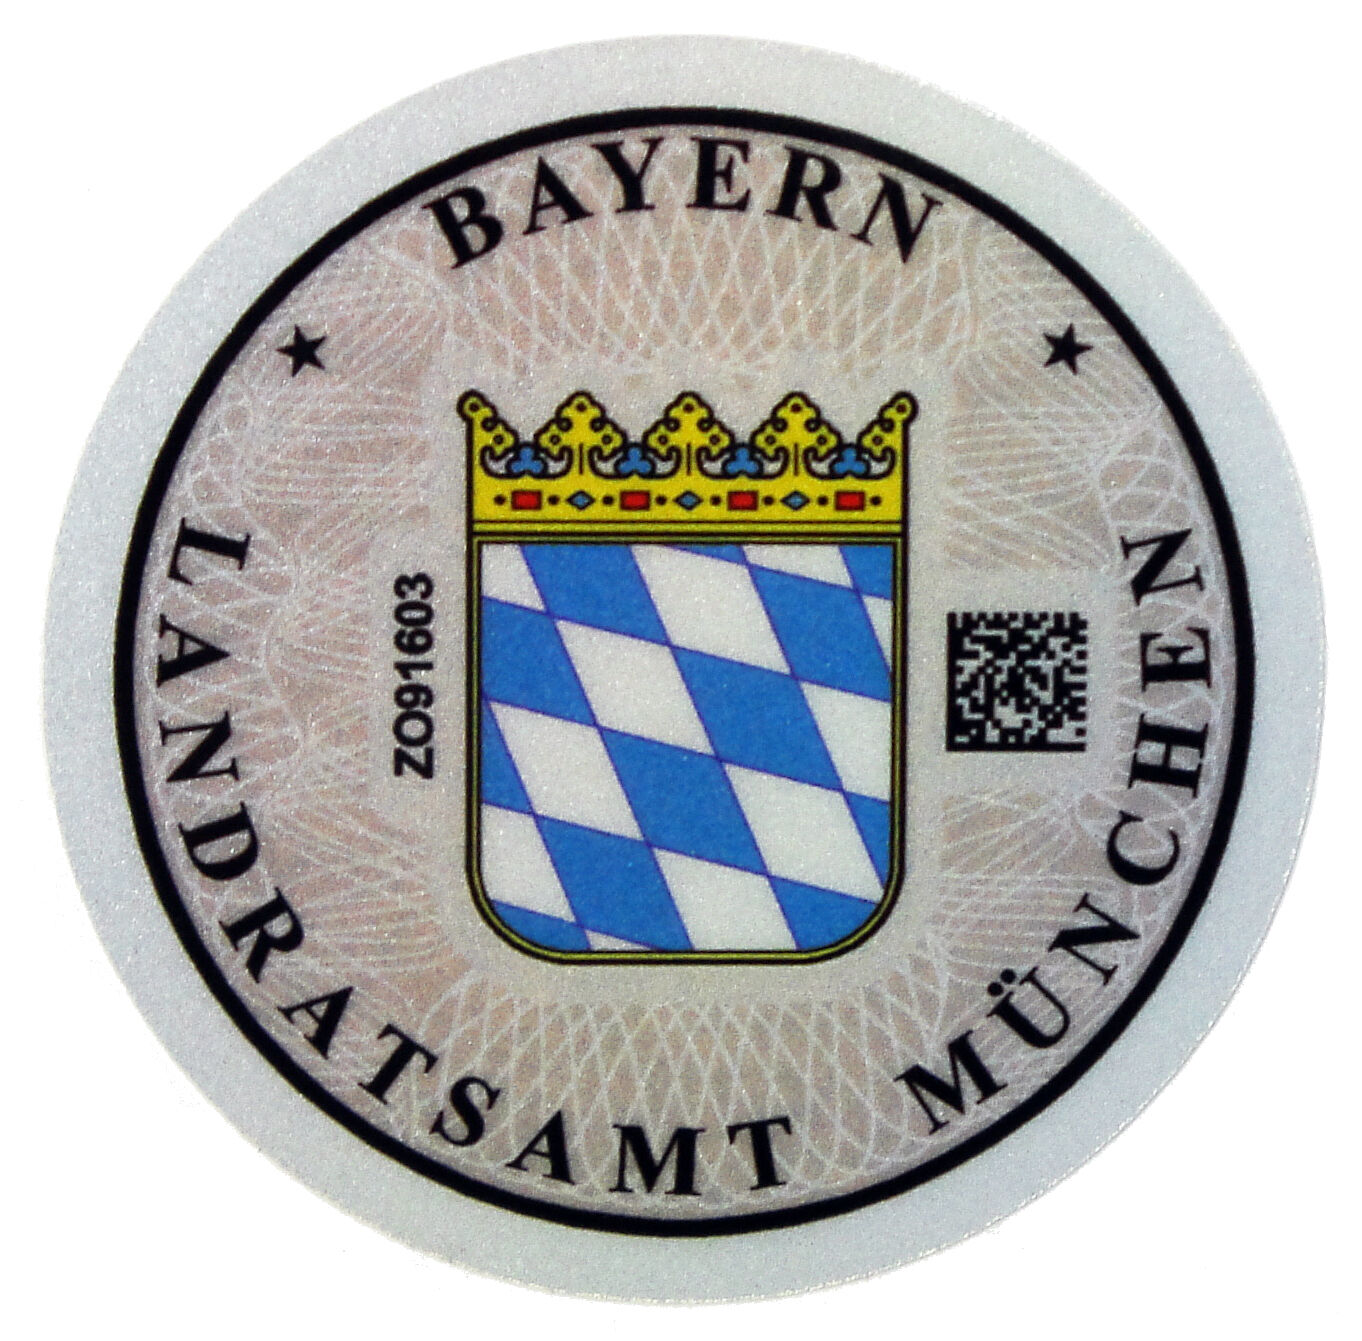 German License Plate Registration Seal And Inspection Replacement Sticker Set